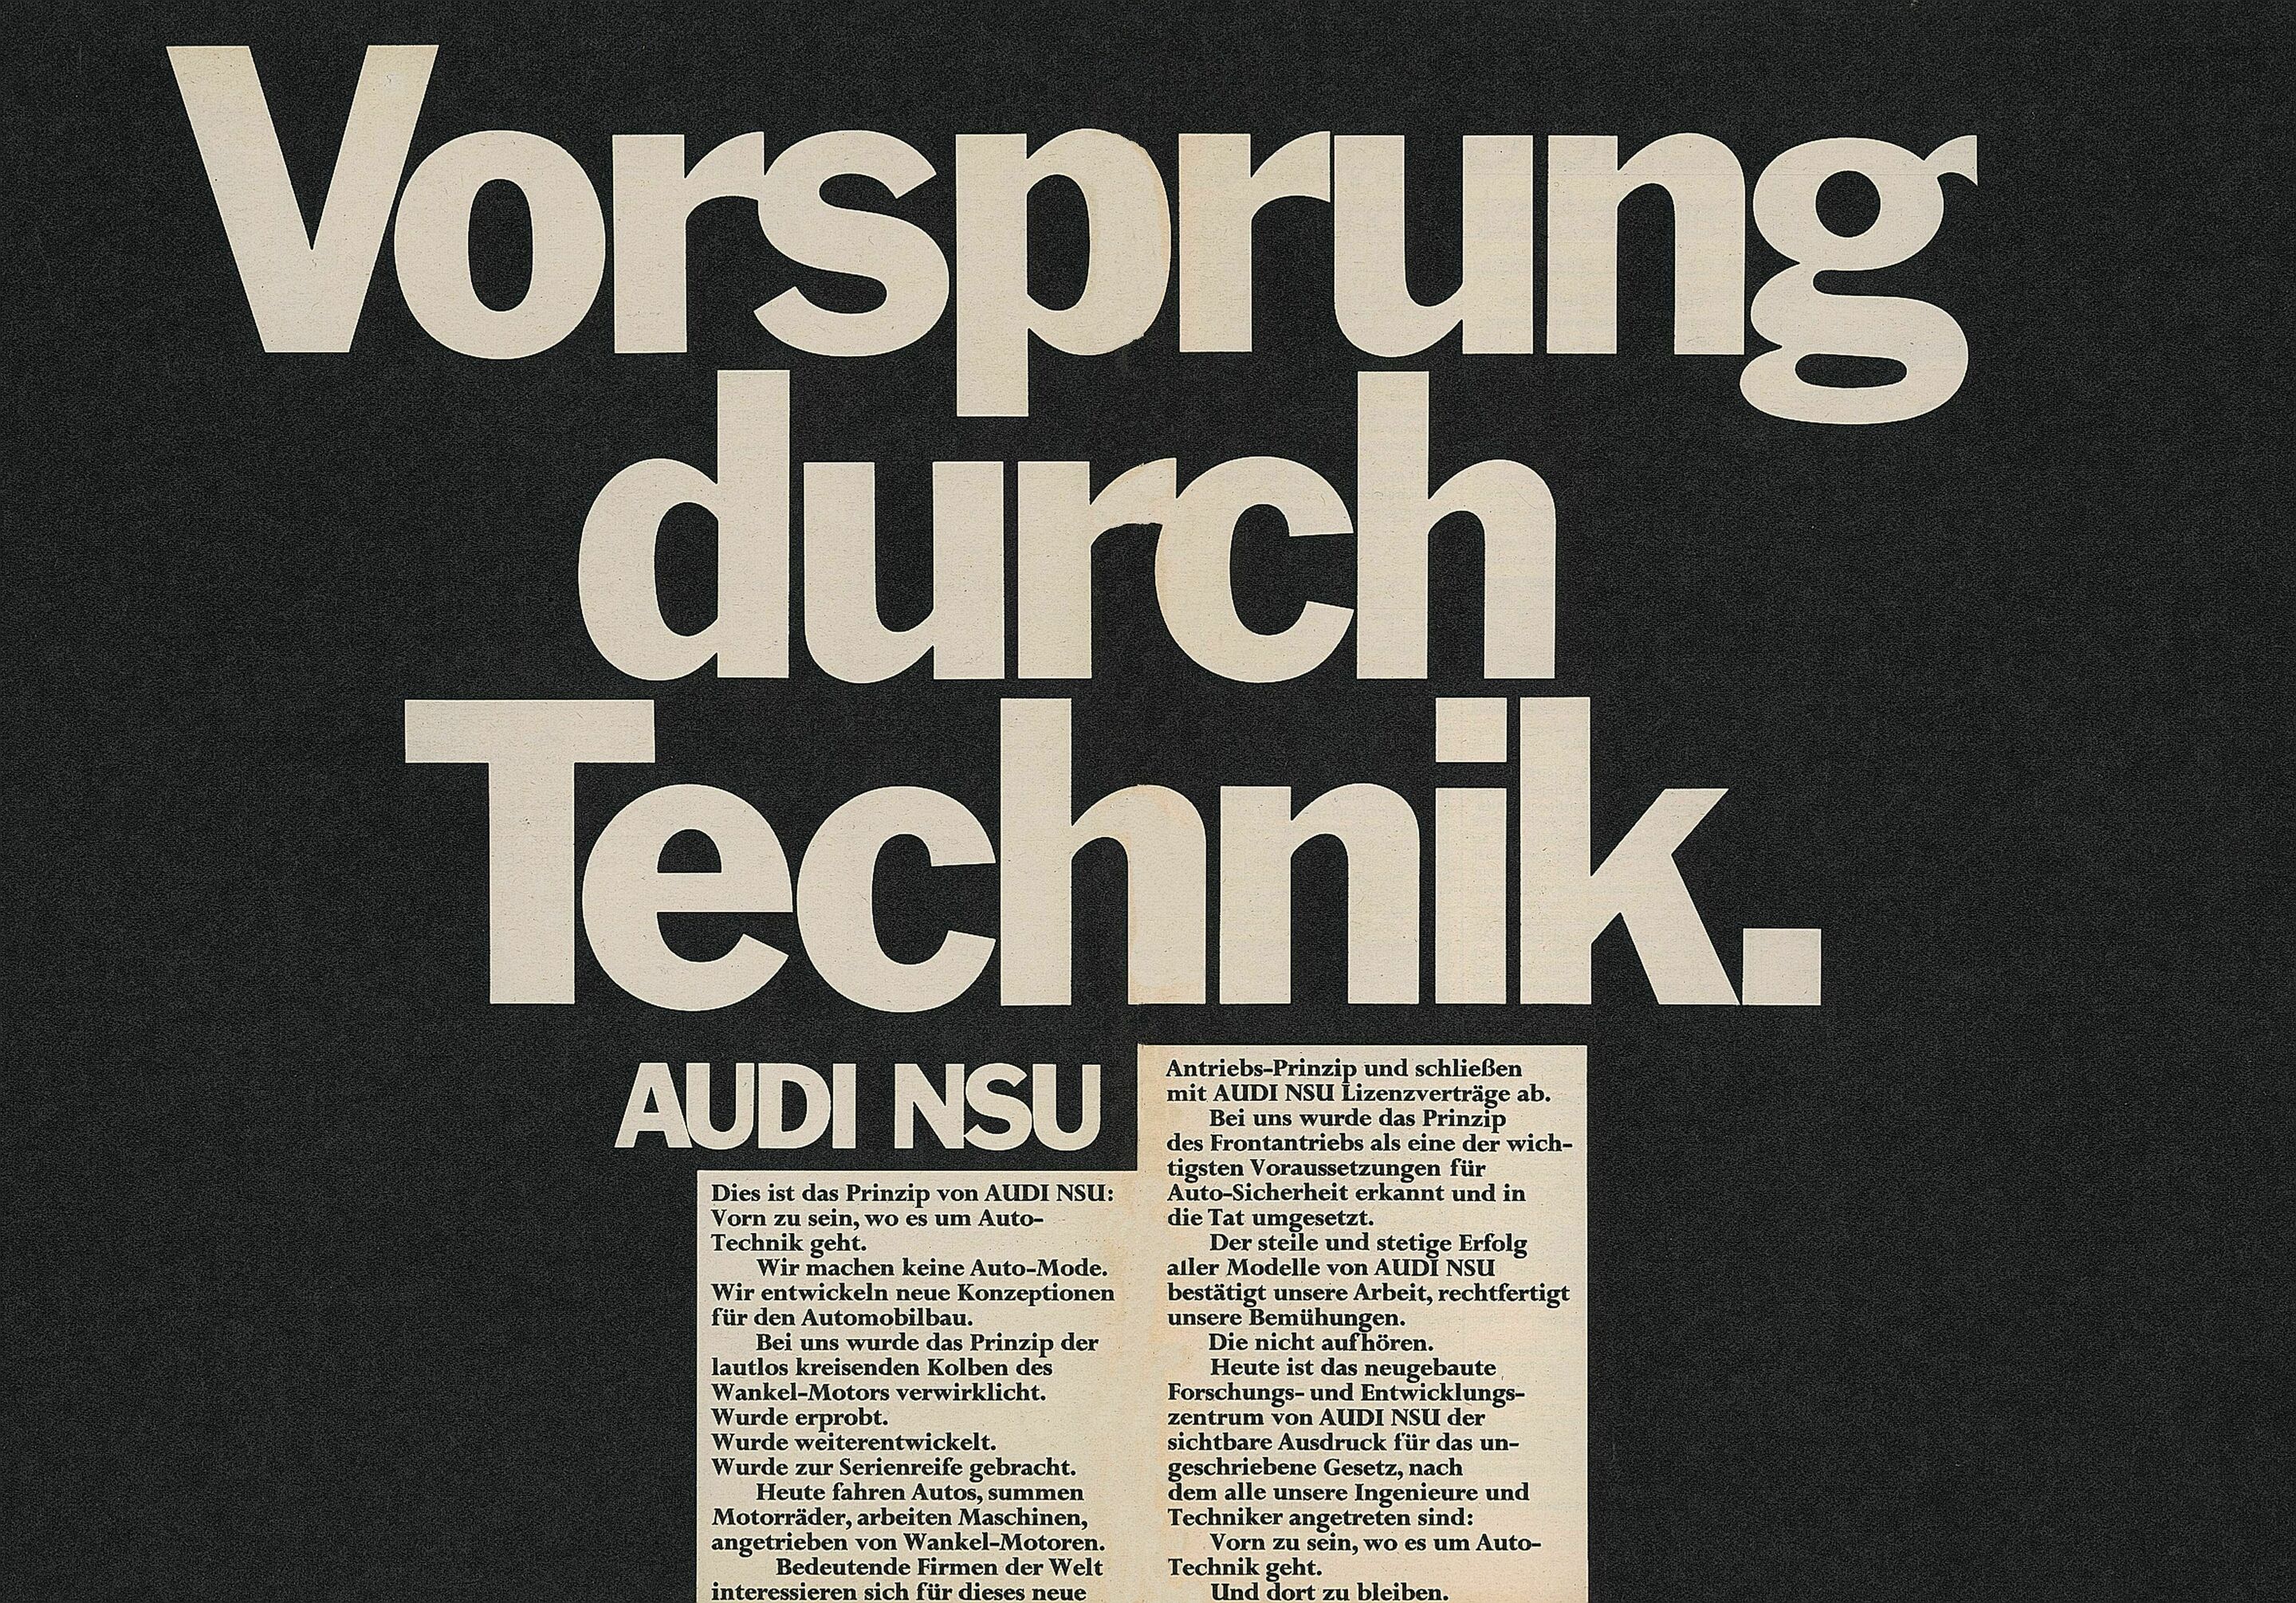 A Slogan with History: Audi Marks 50 Years of “Vorsprung durch Technik”